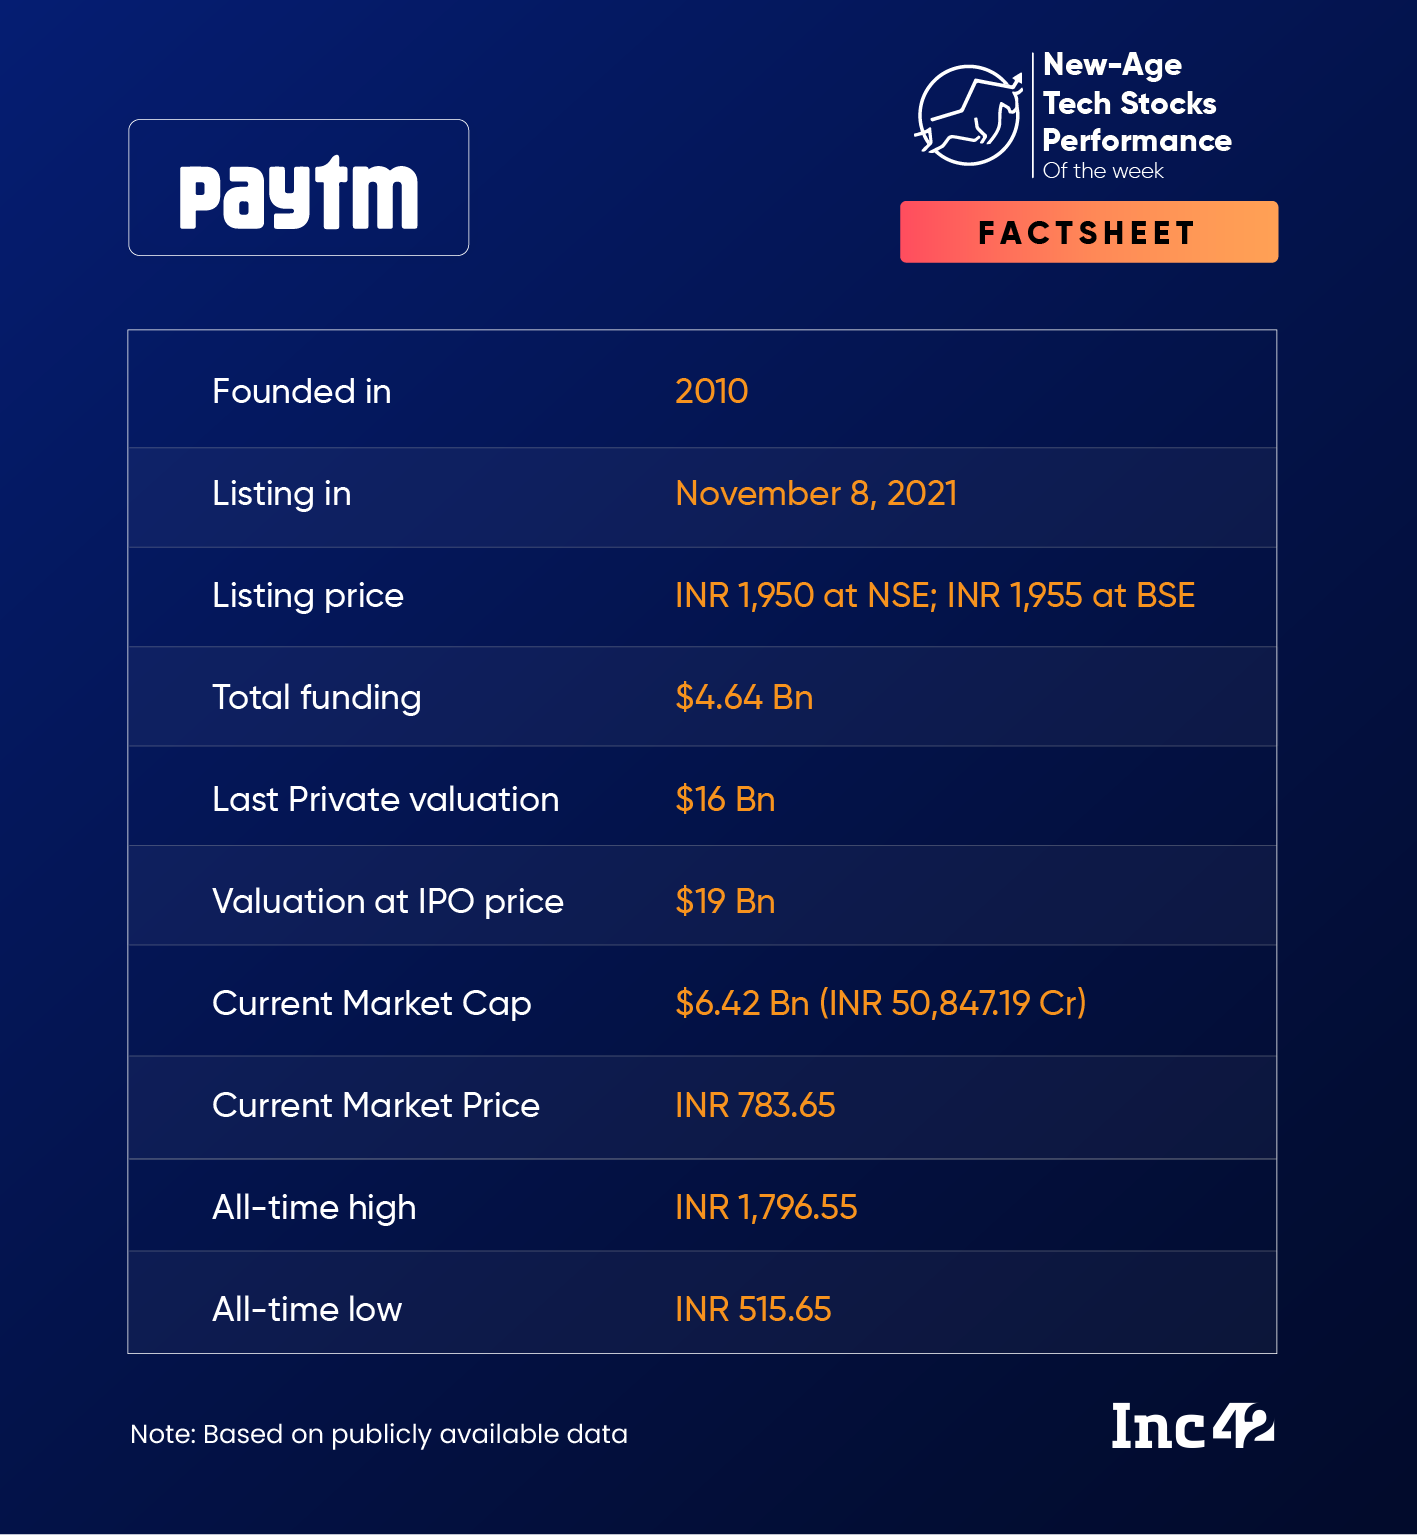 Paytm Up Over 16% This Week